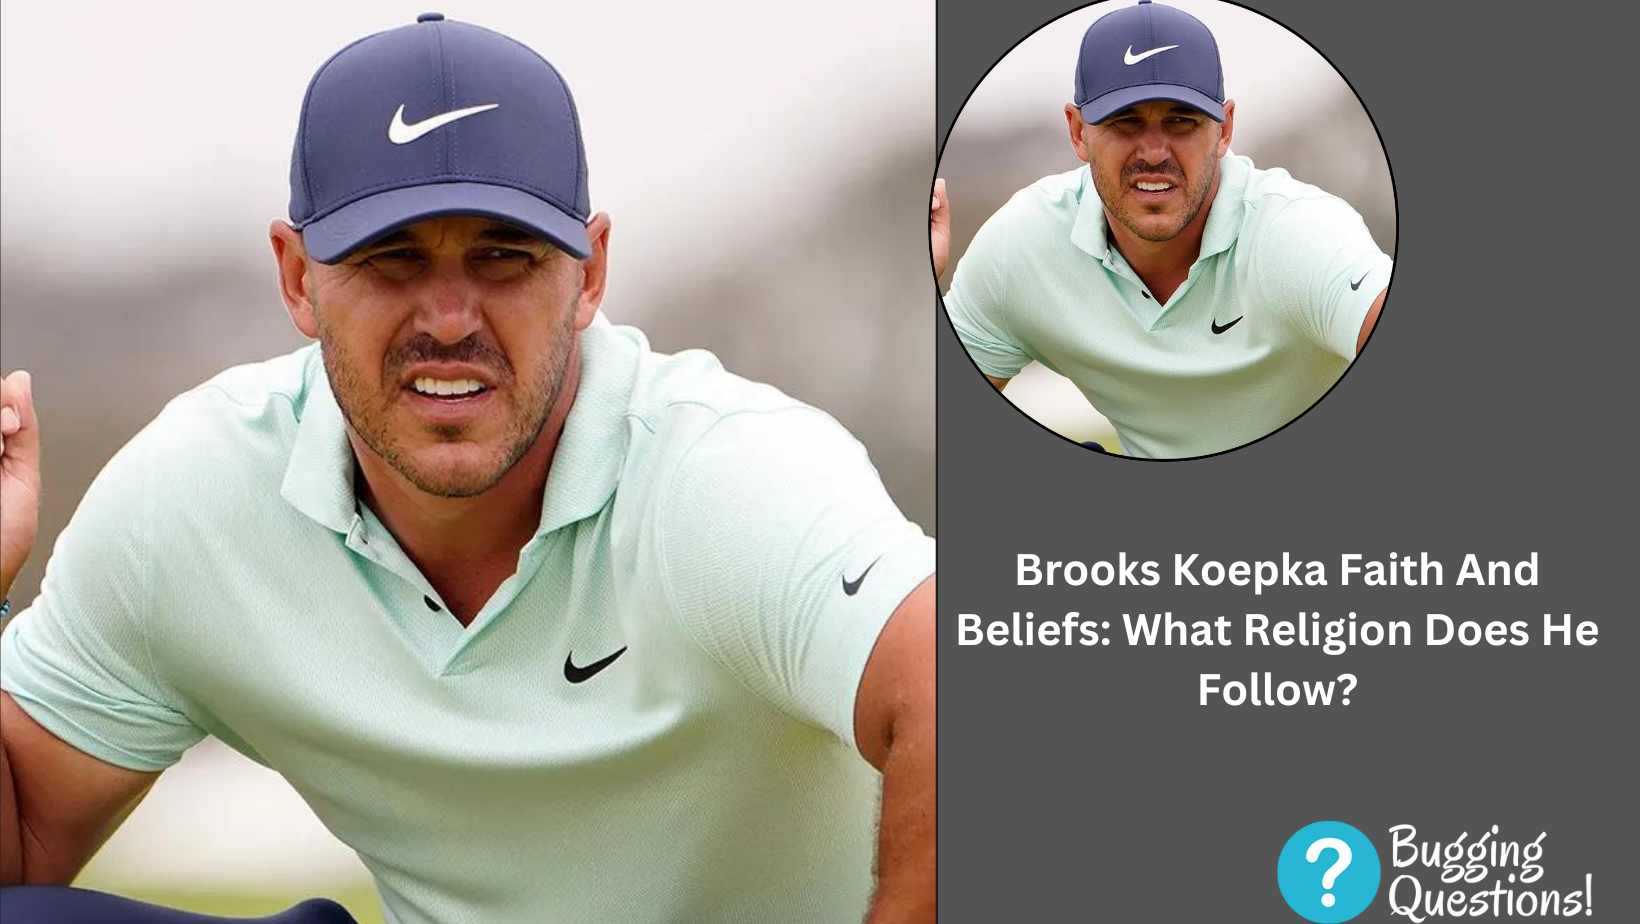 Brooks Koepka Faith And Beliefs: What Religion Does He Follow?